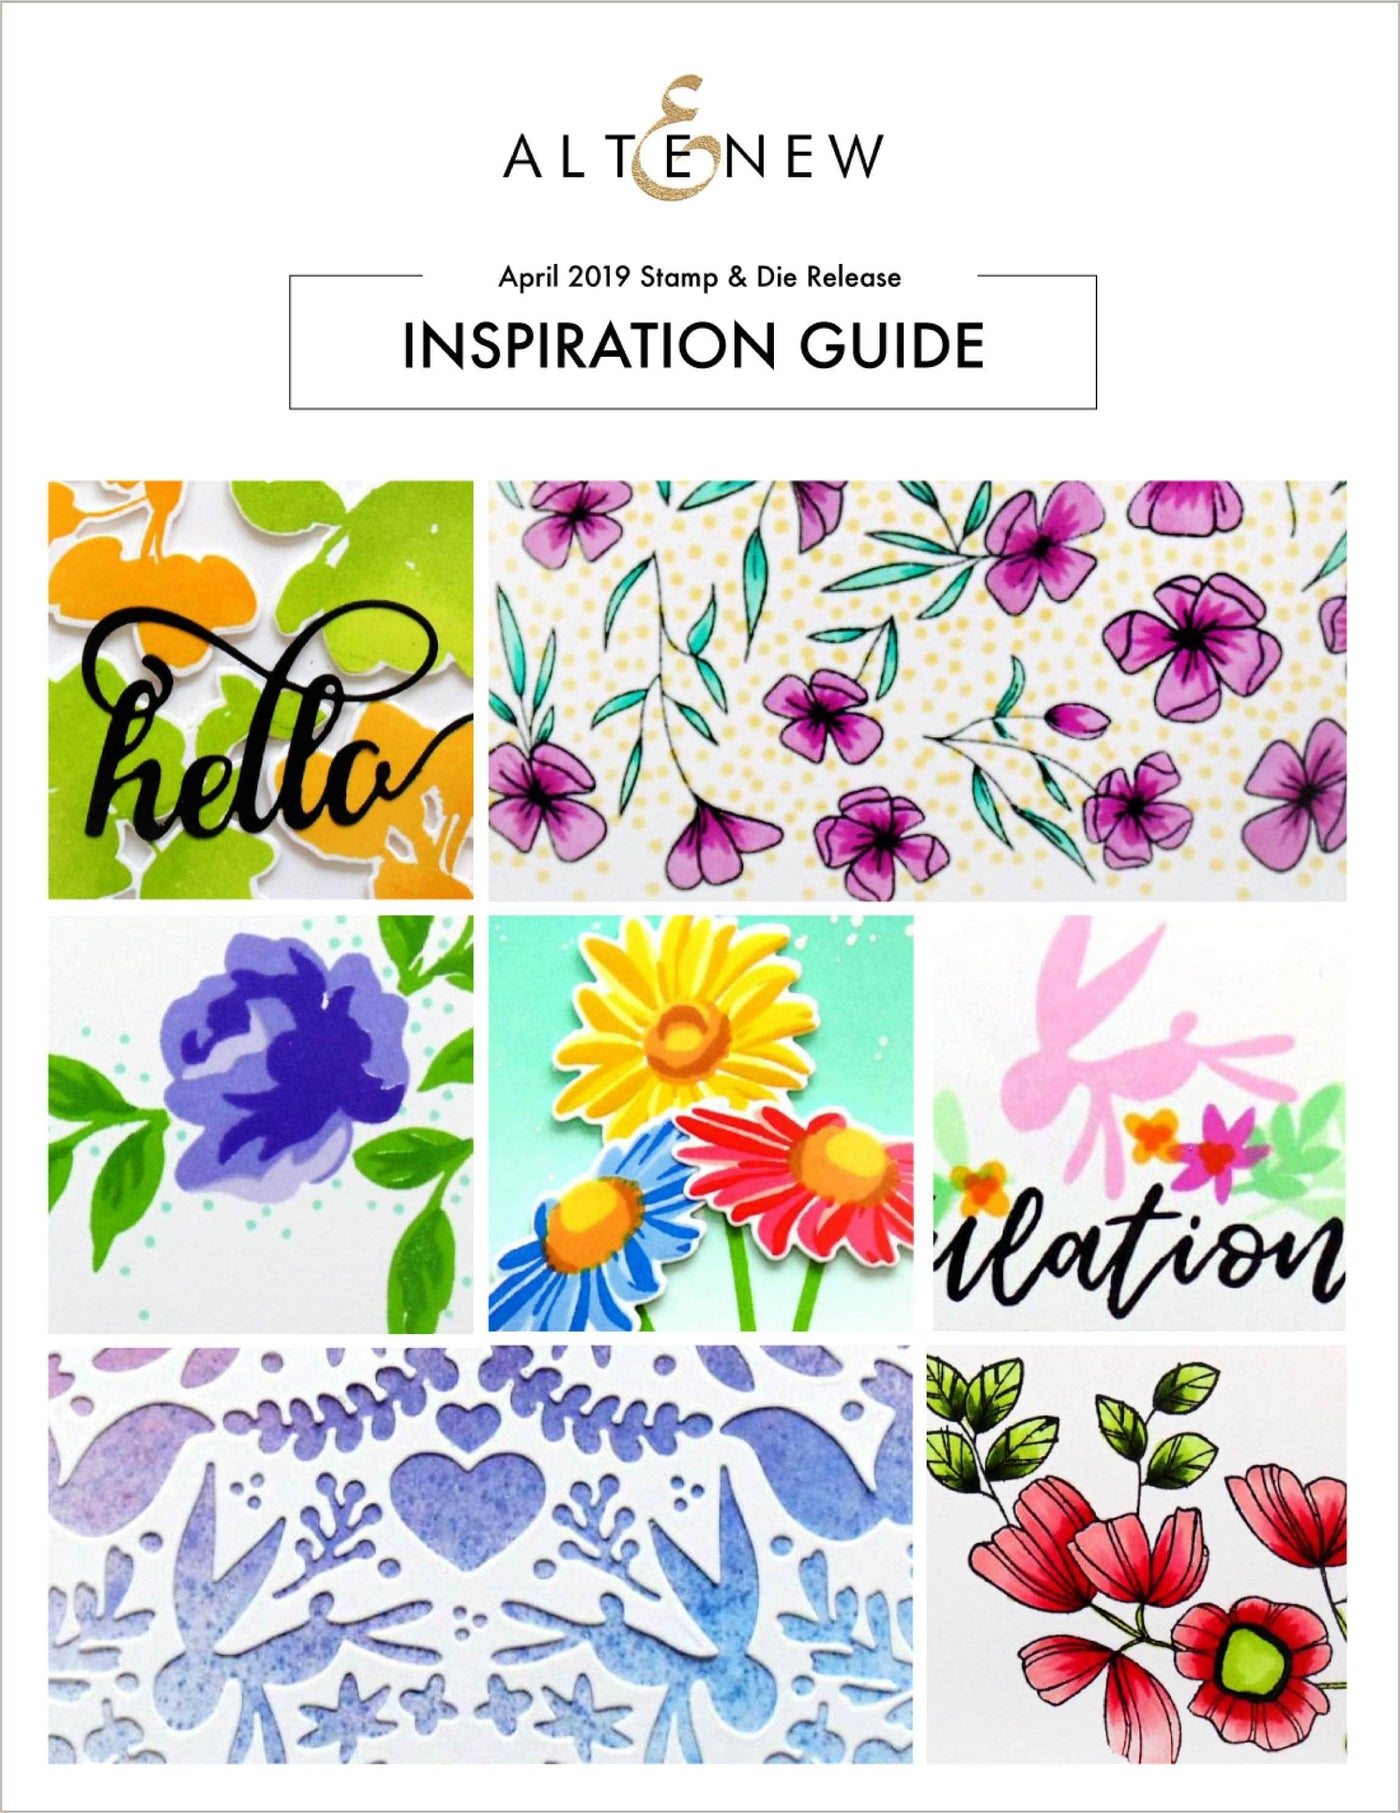 Printed Media A Study in Kindness Stamp & Die Release Inspiration Guide